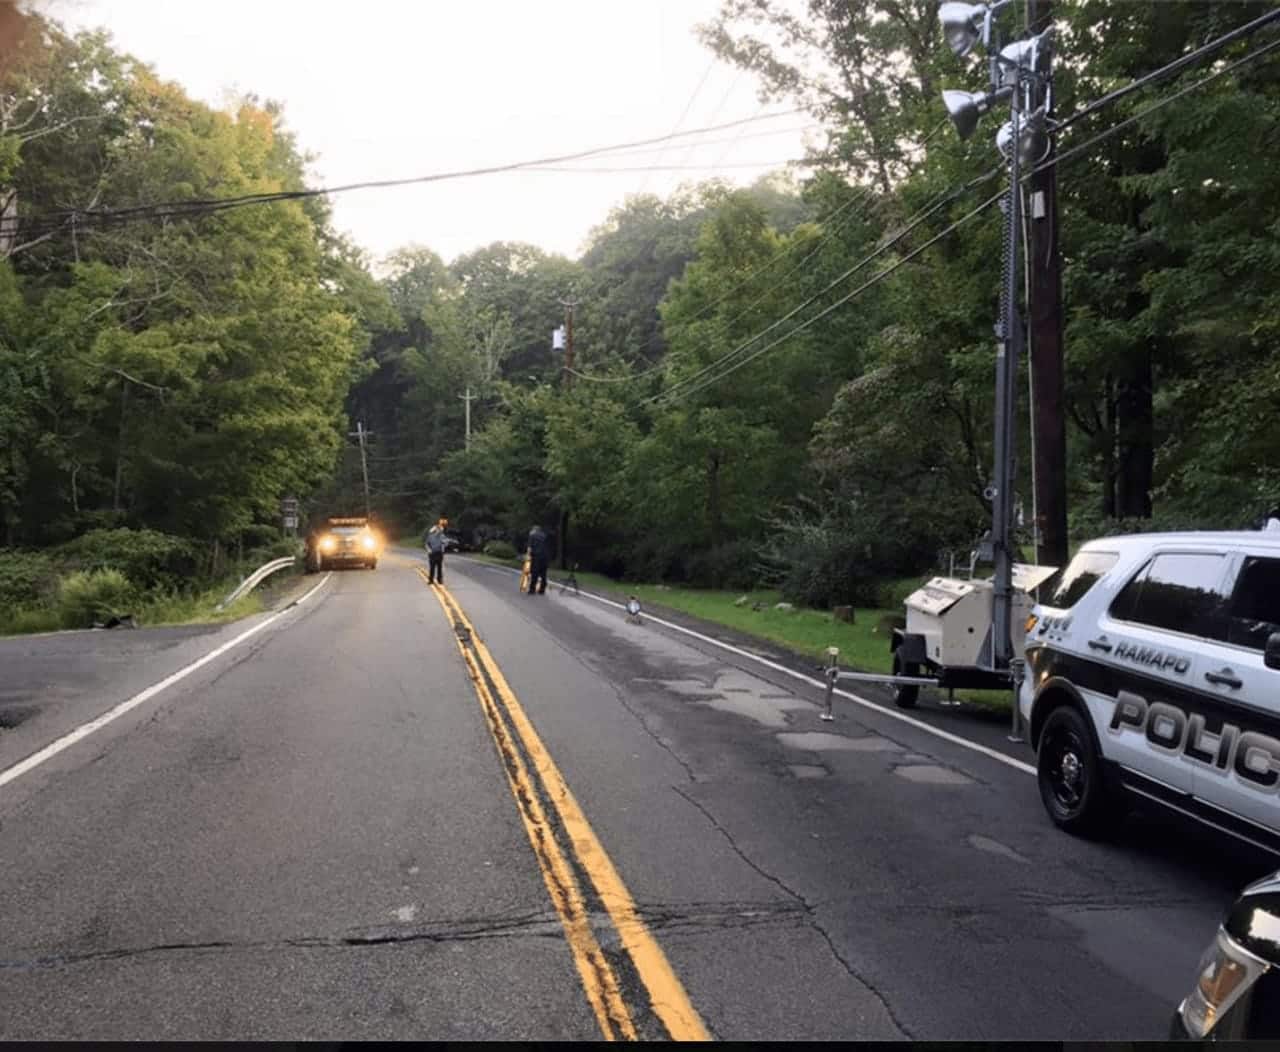 Route 202 near the intersection of Wilder Road is where two cars sideswiped each other sending one car flying into a group of students standing in a driveway, killing one and injuring anoter.